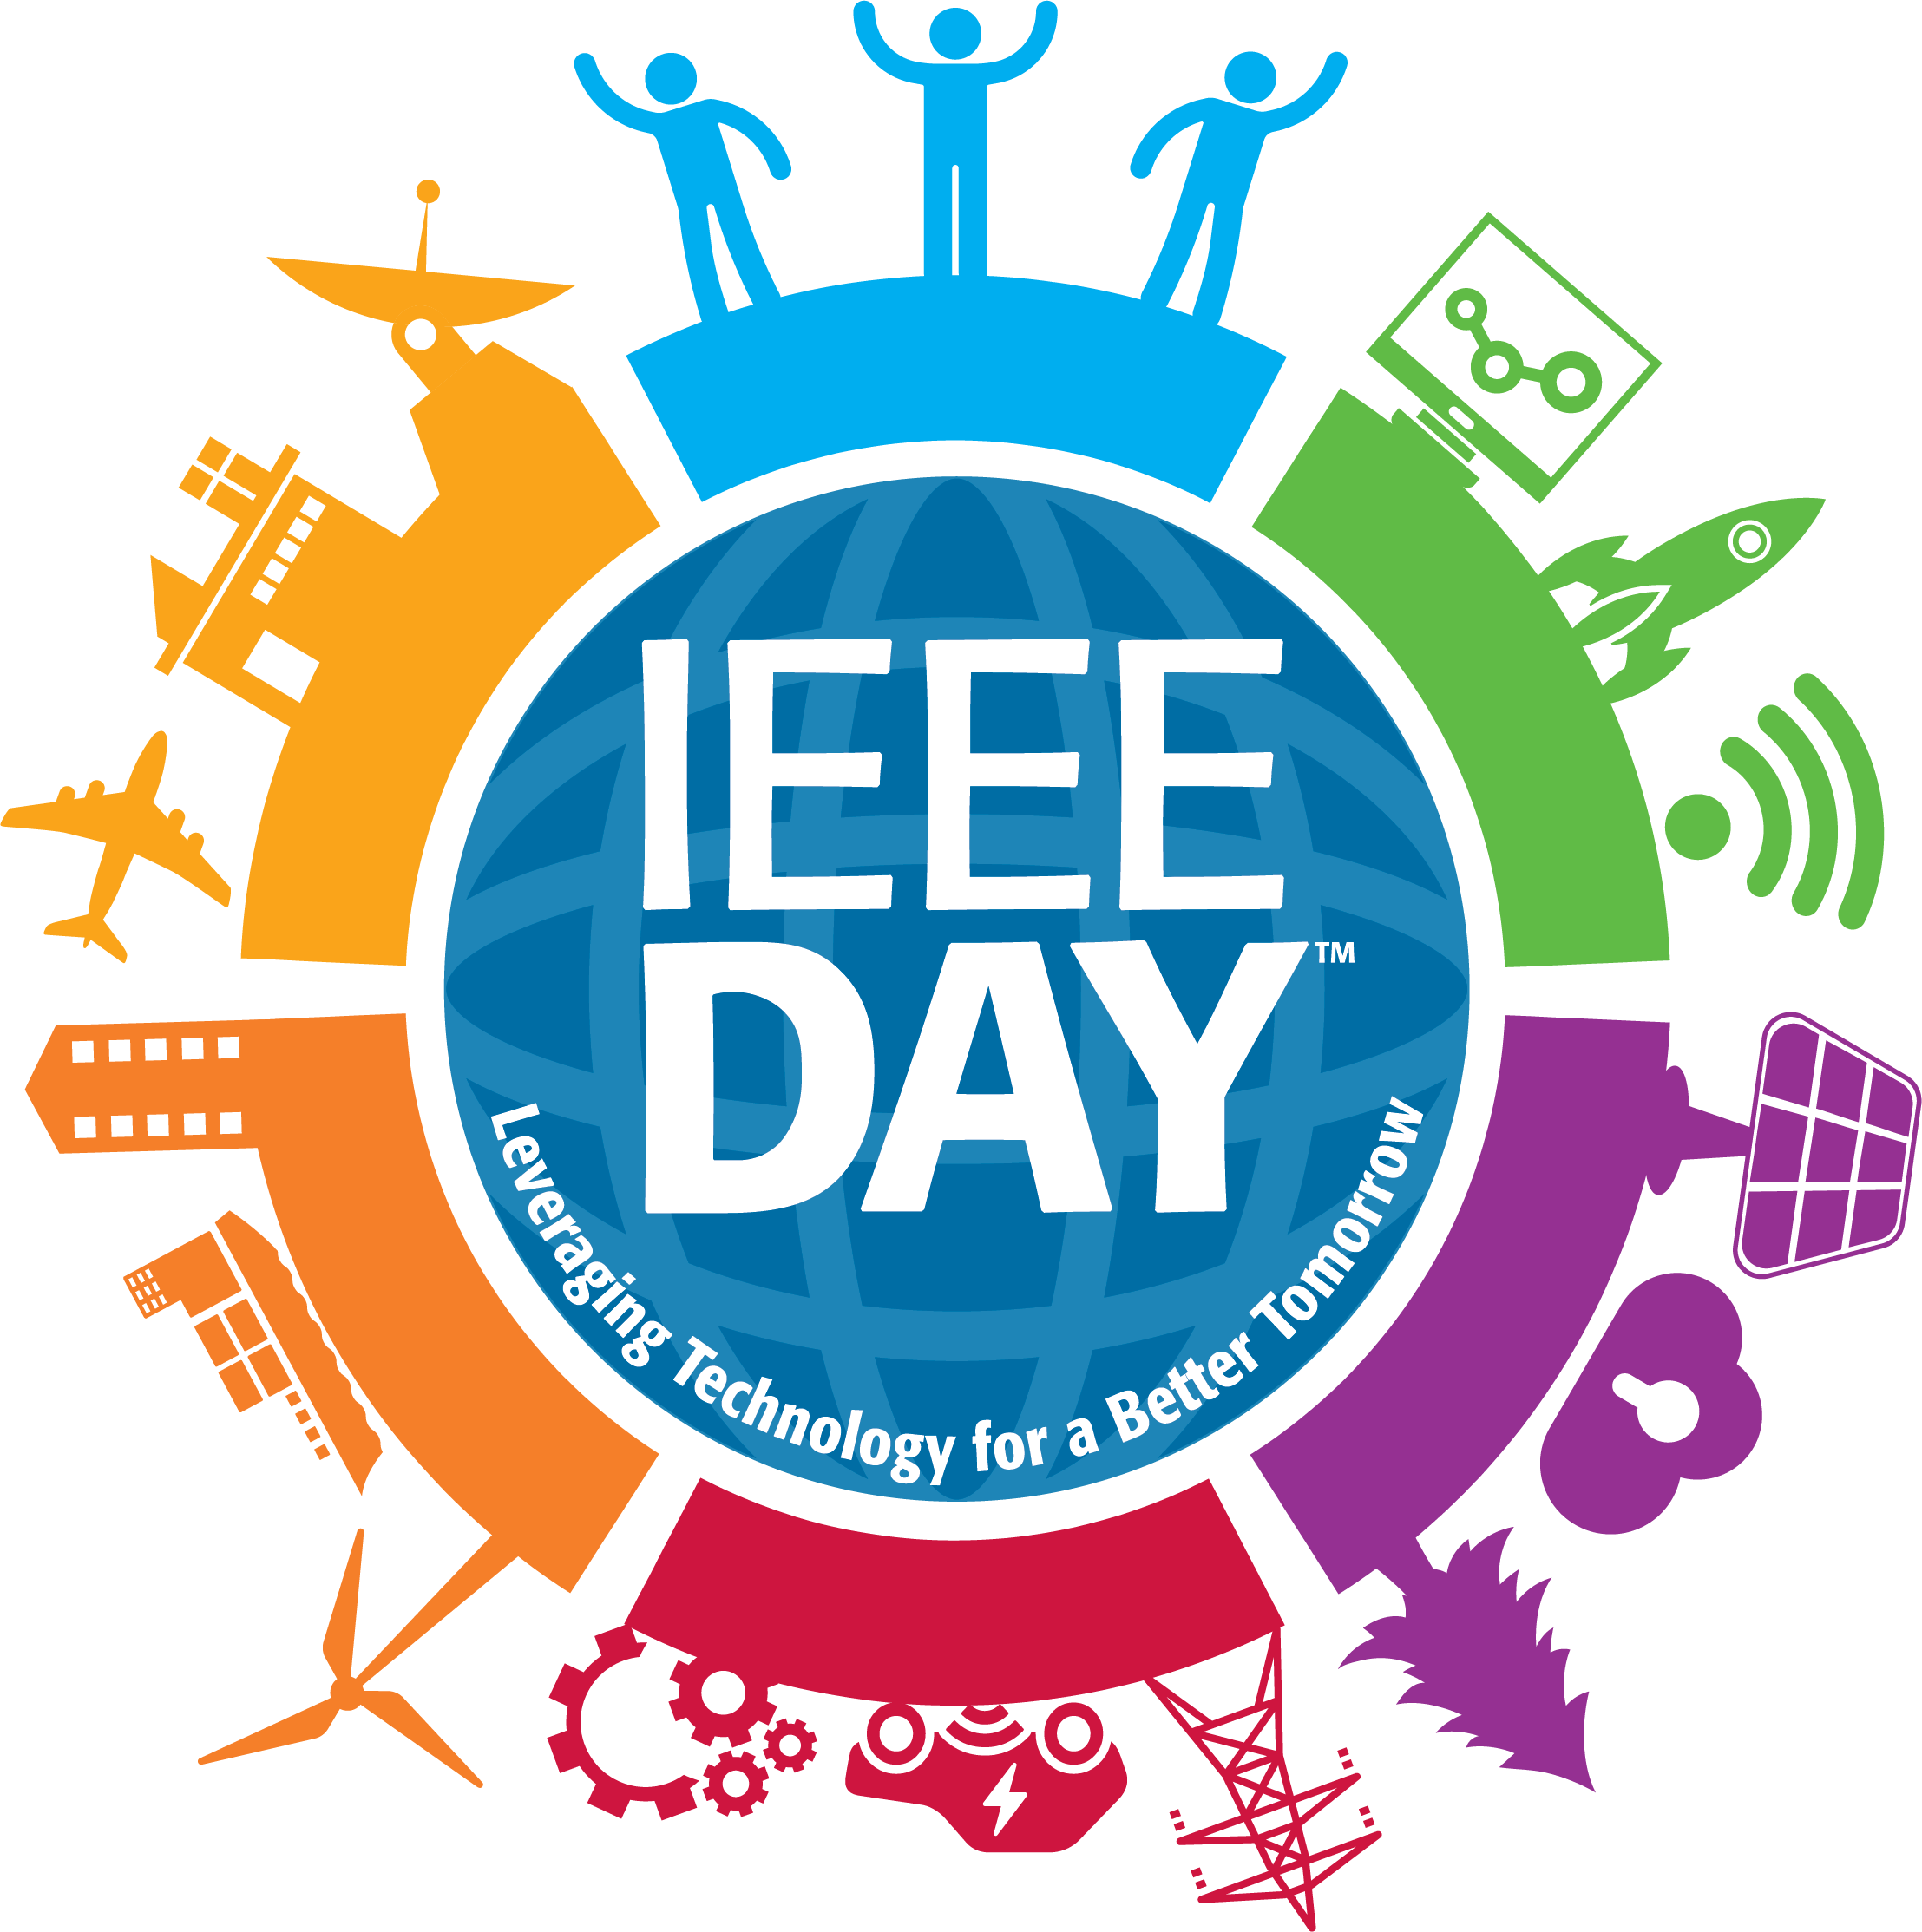 IEEE-Day